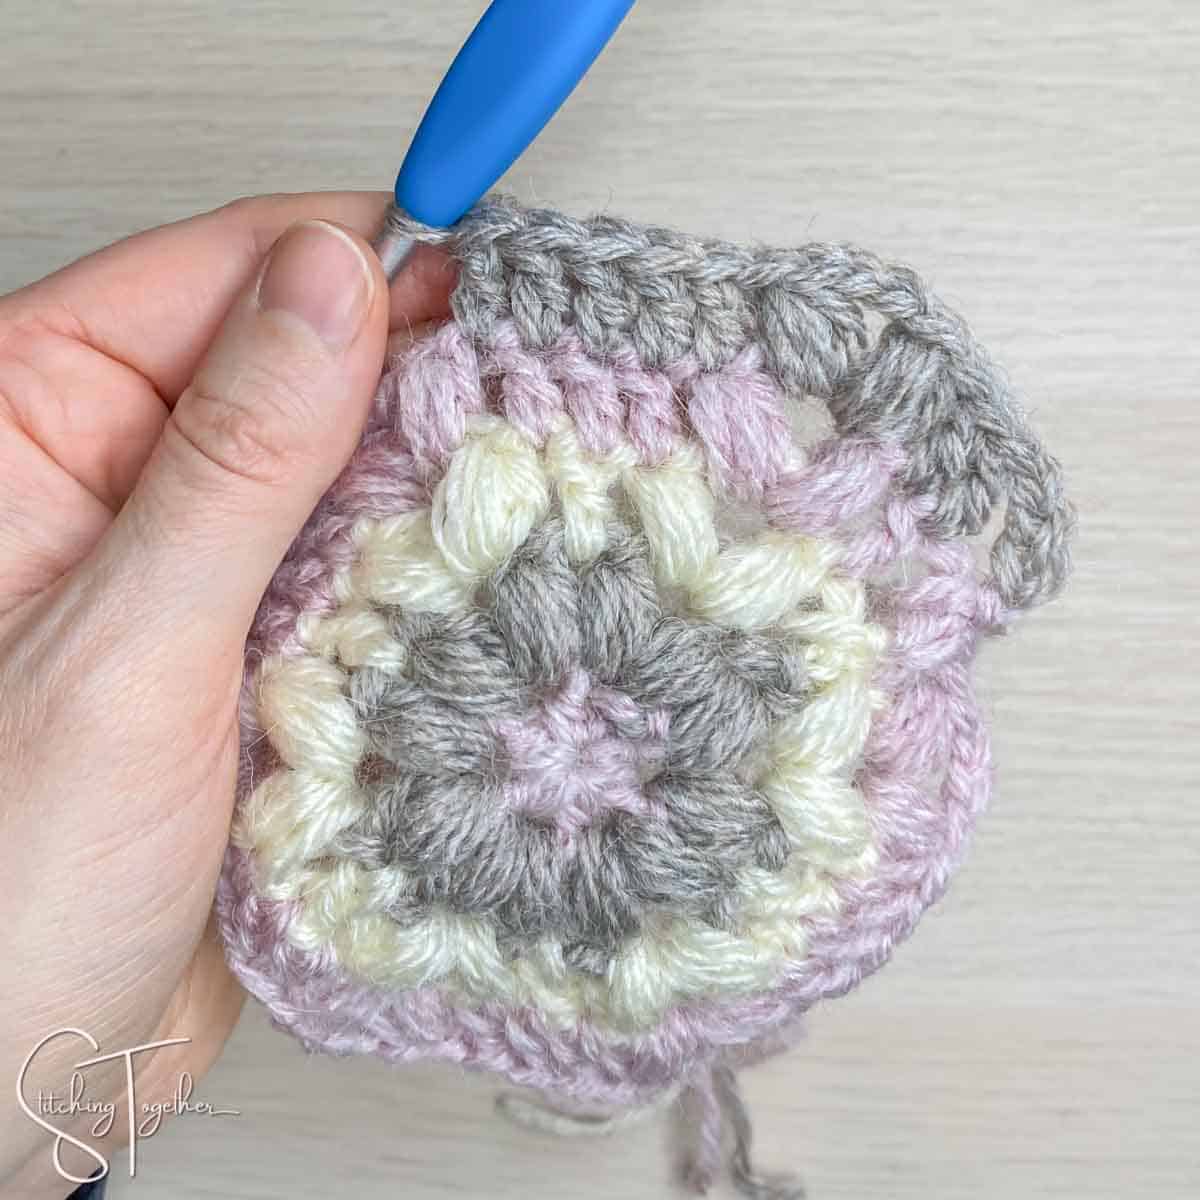 showing stitch placement for round 5 of a crochet hexagon